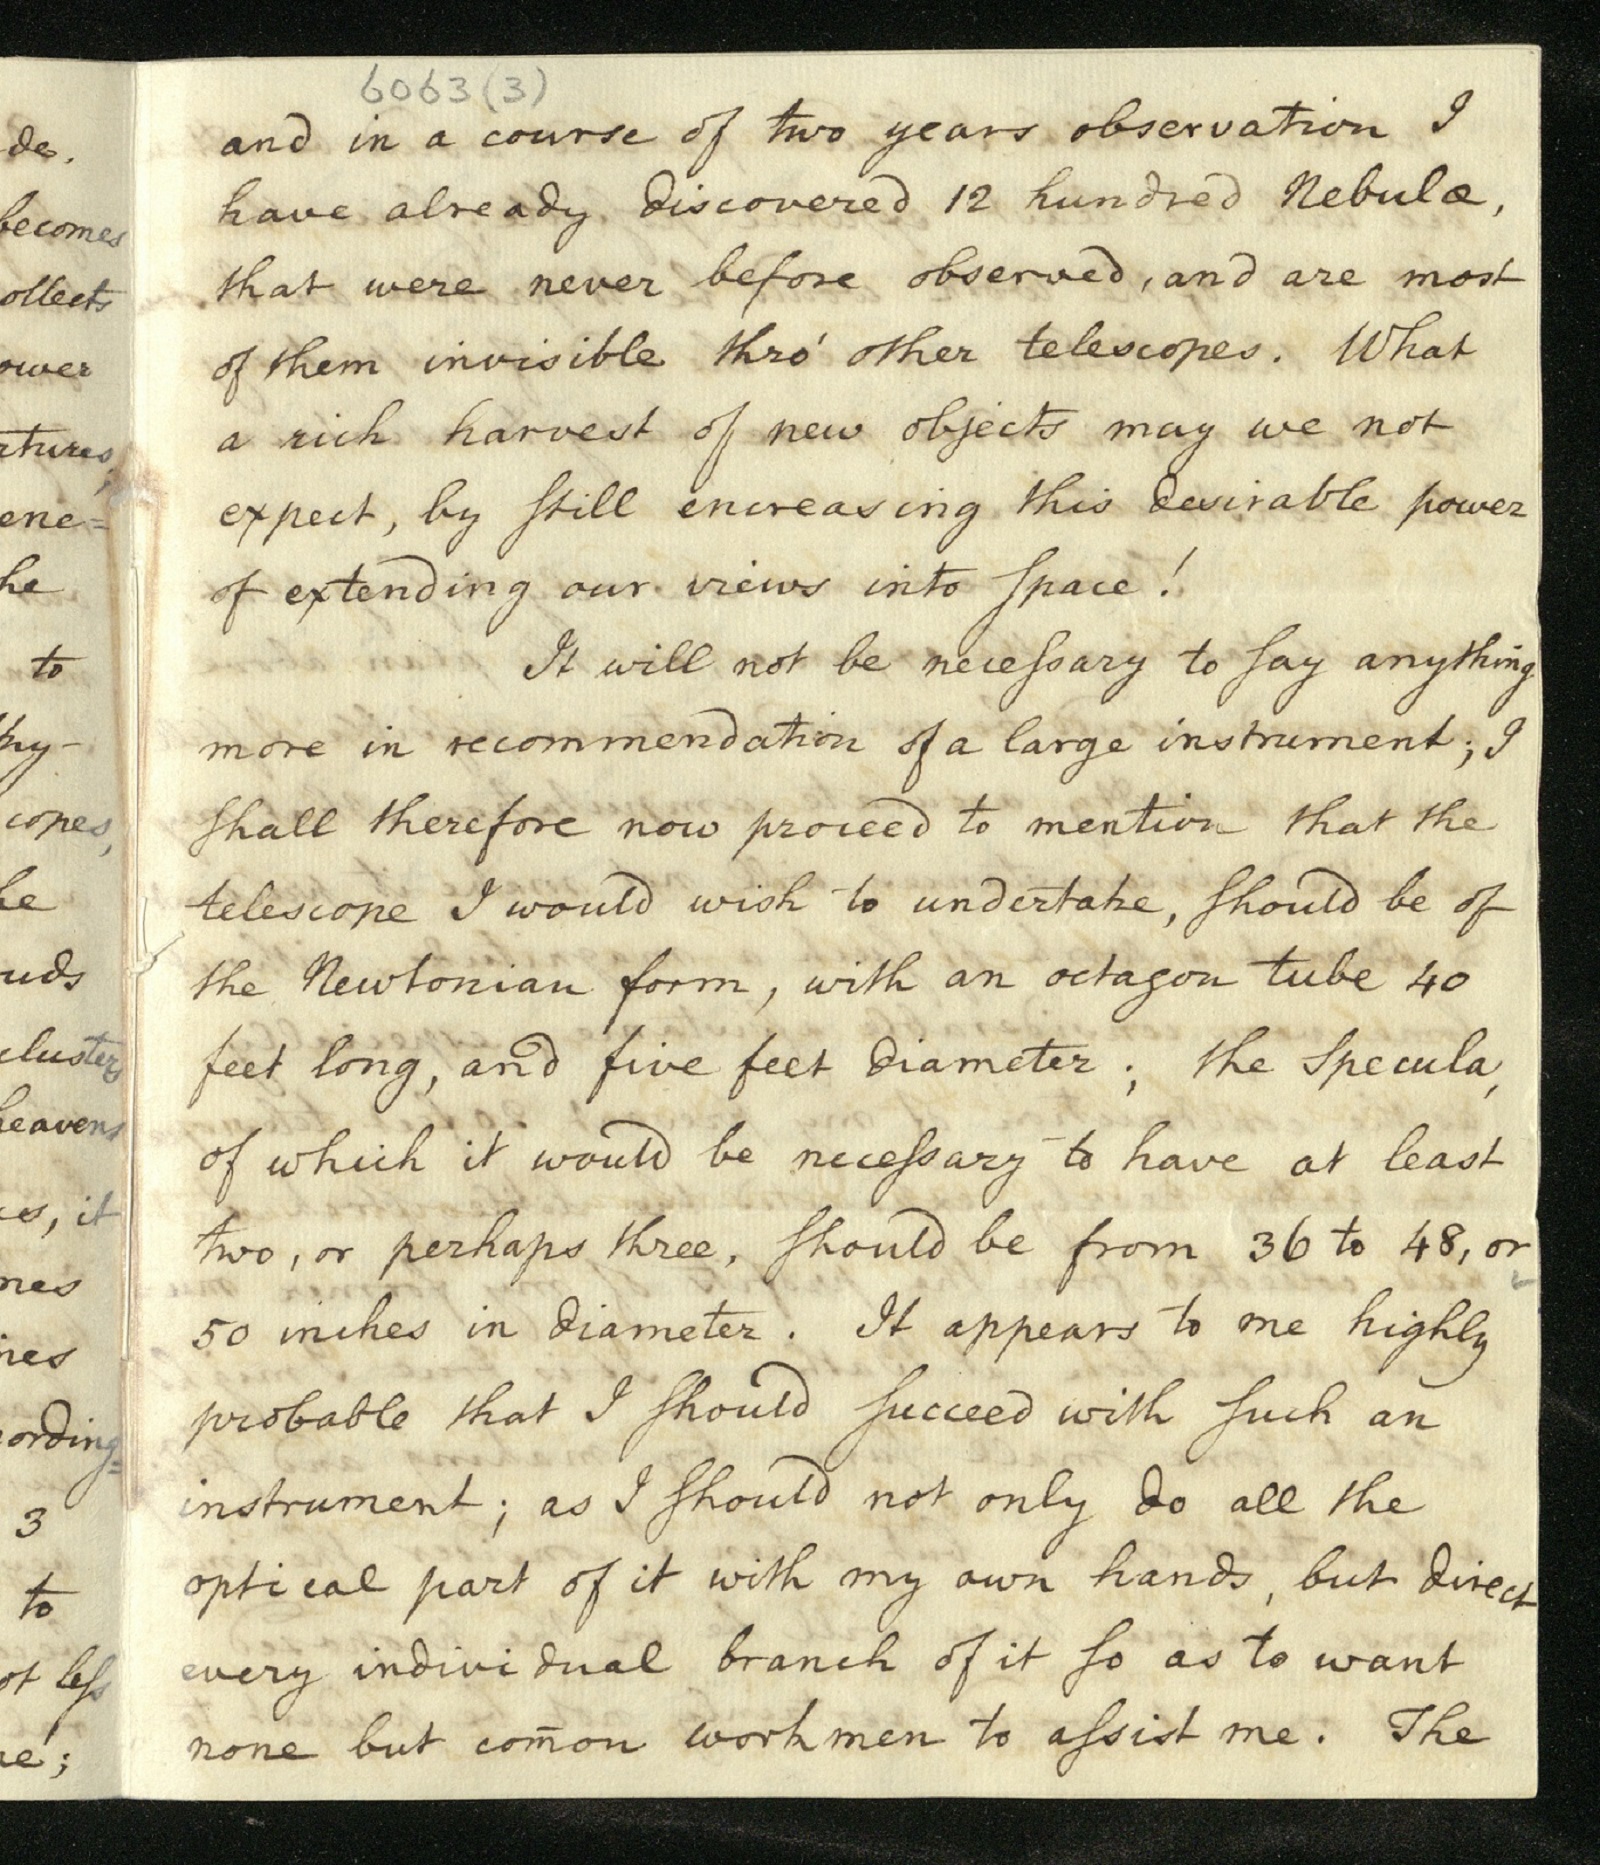 Letter from William Herschel to Sir Joseph Banks, with an estimate of the expenses required to build an enlarged telescope, page 5